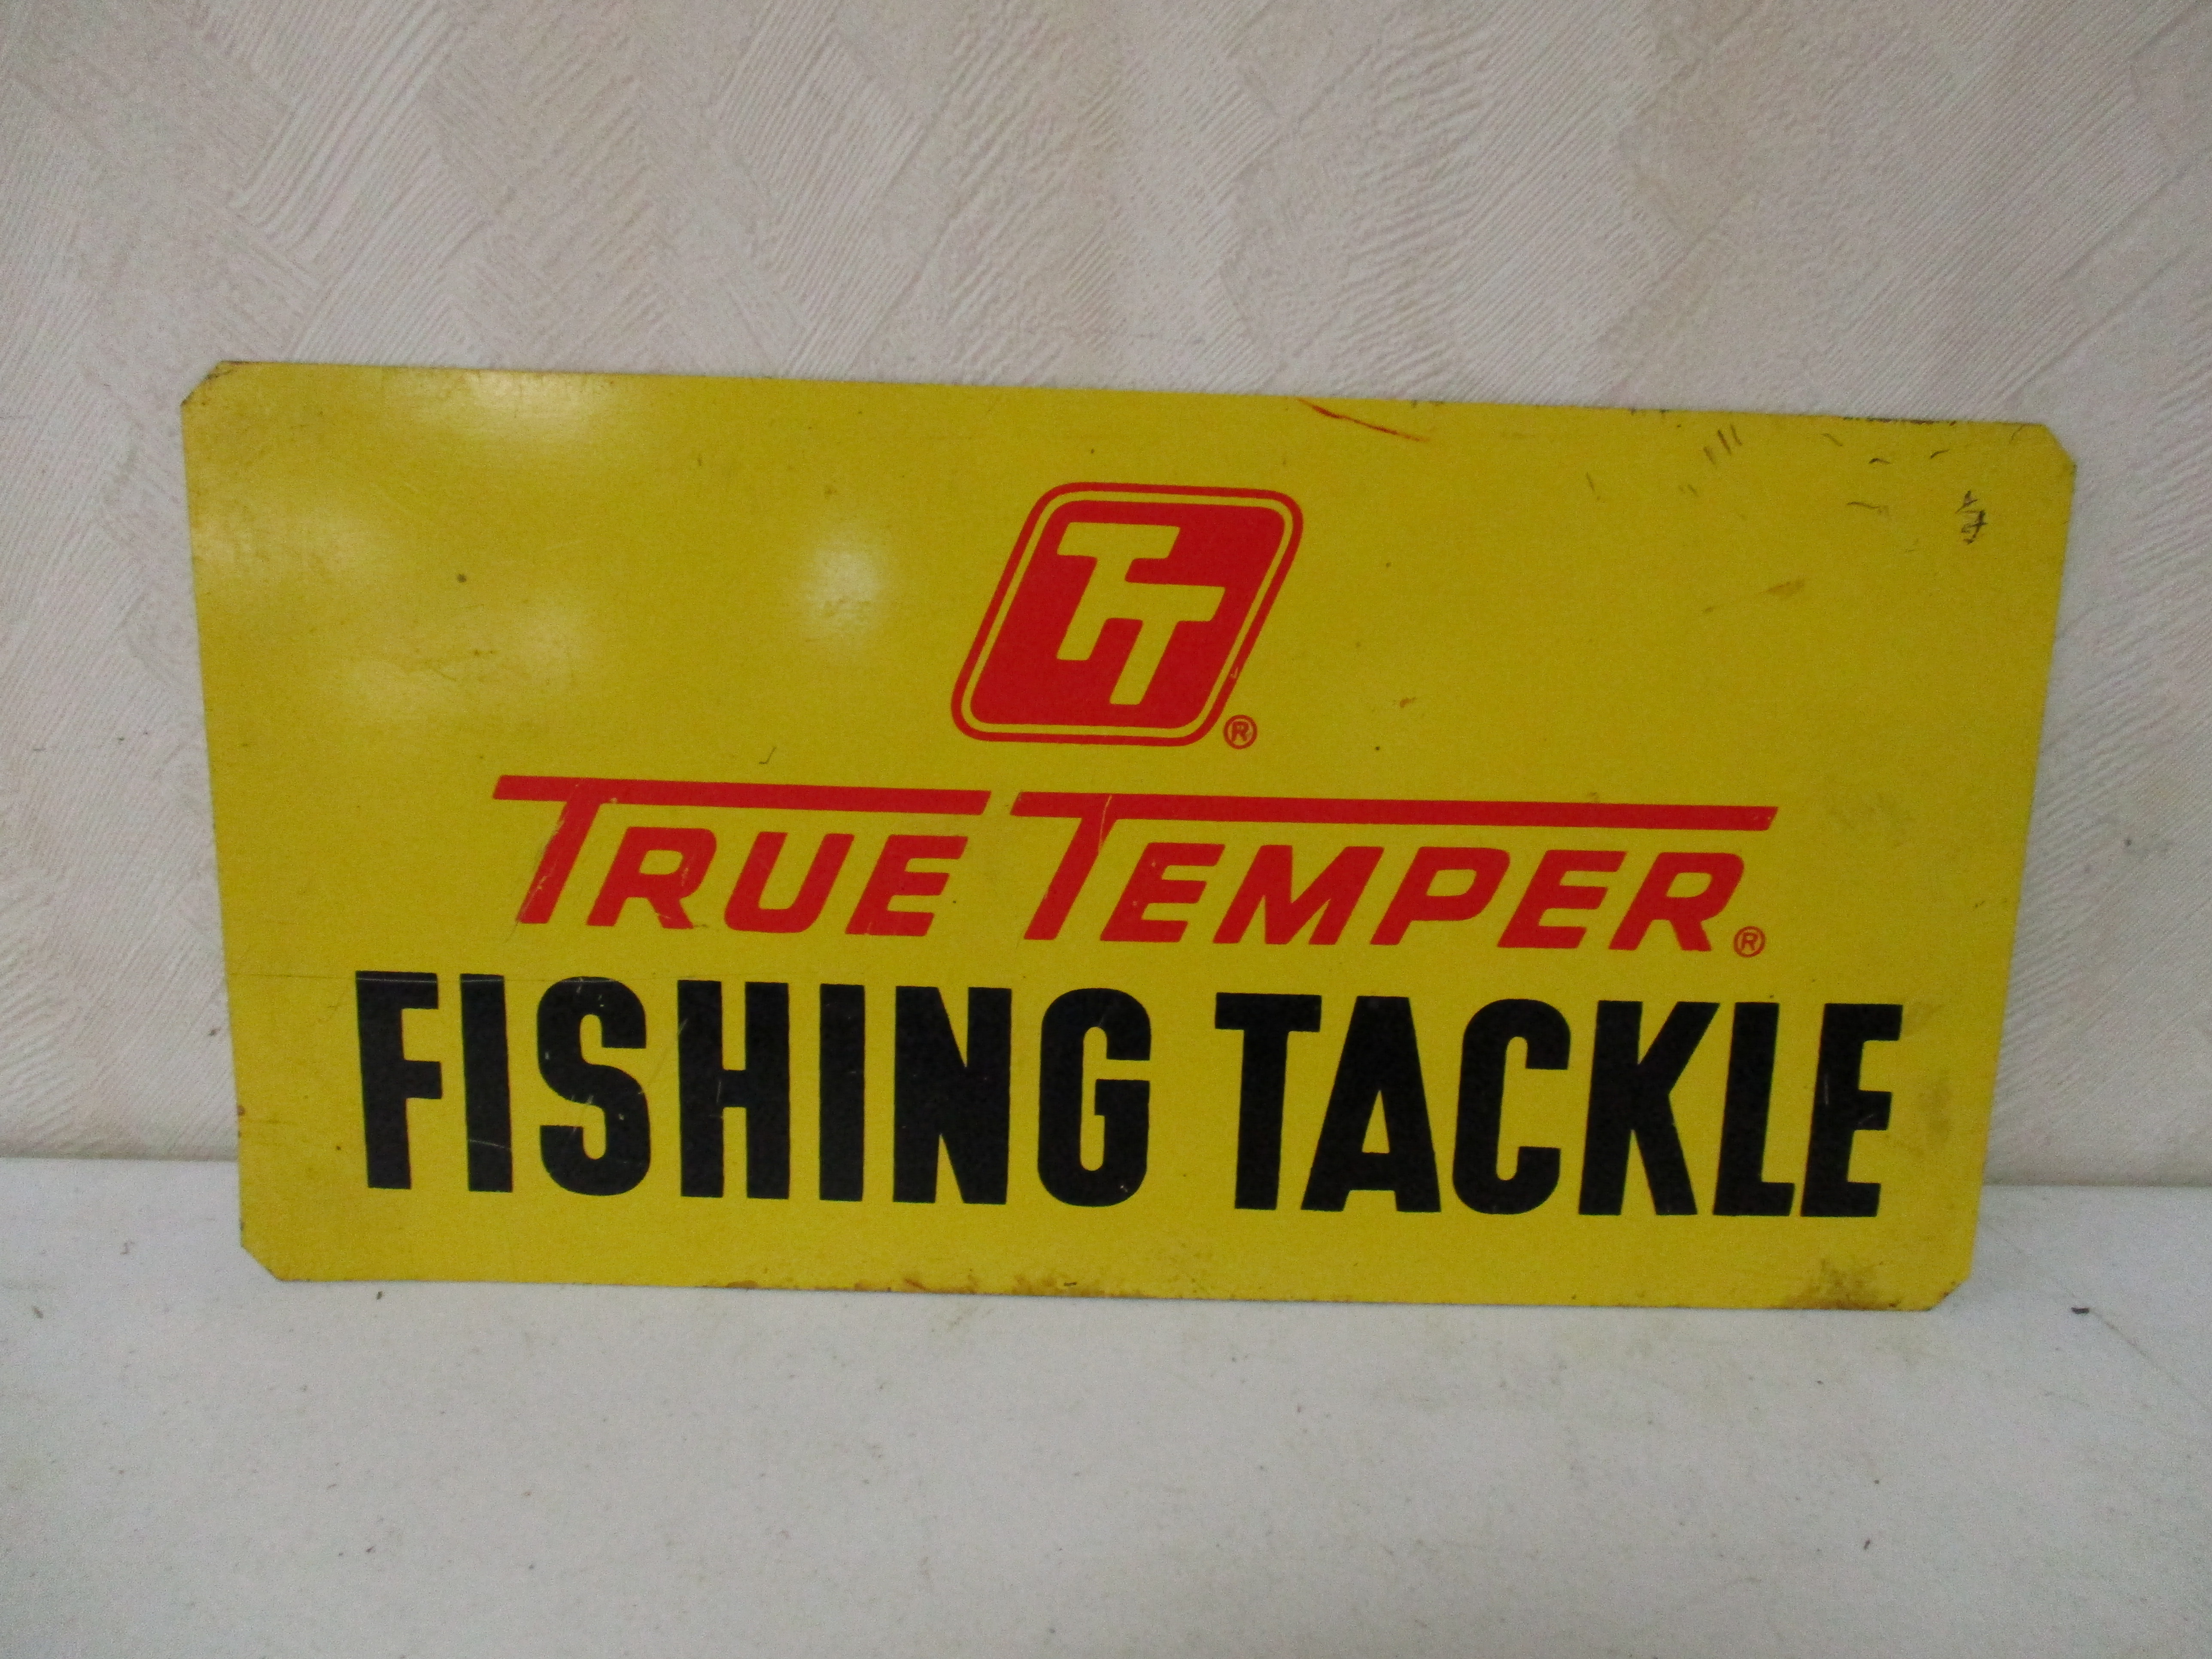 Lot 131: TruTemper Fishing Tackle DST Sign - 7" X 13"